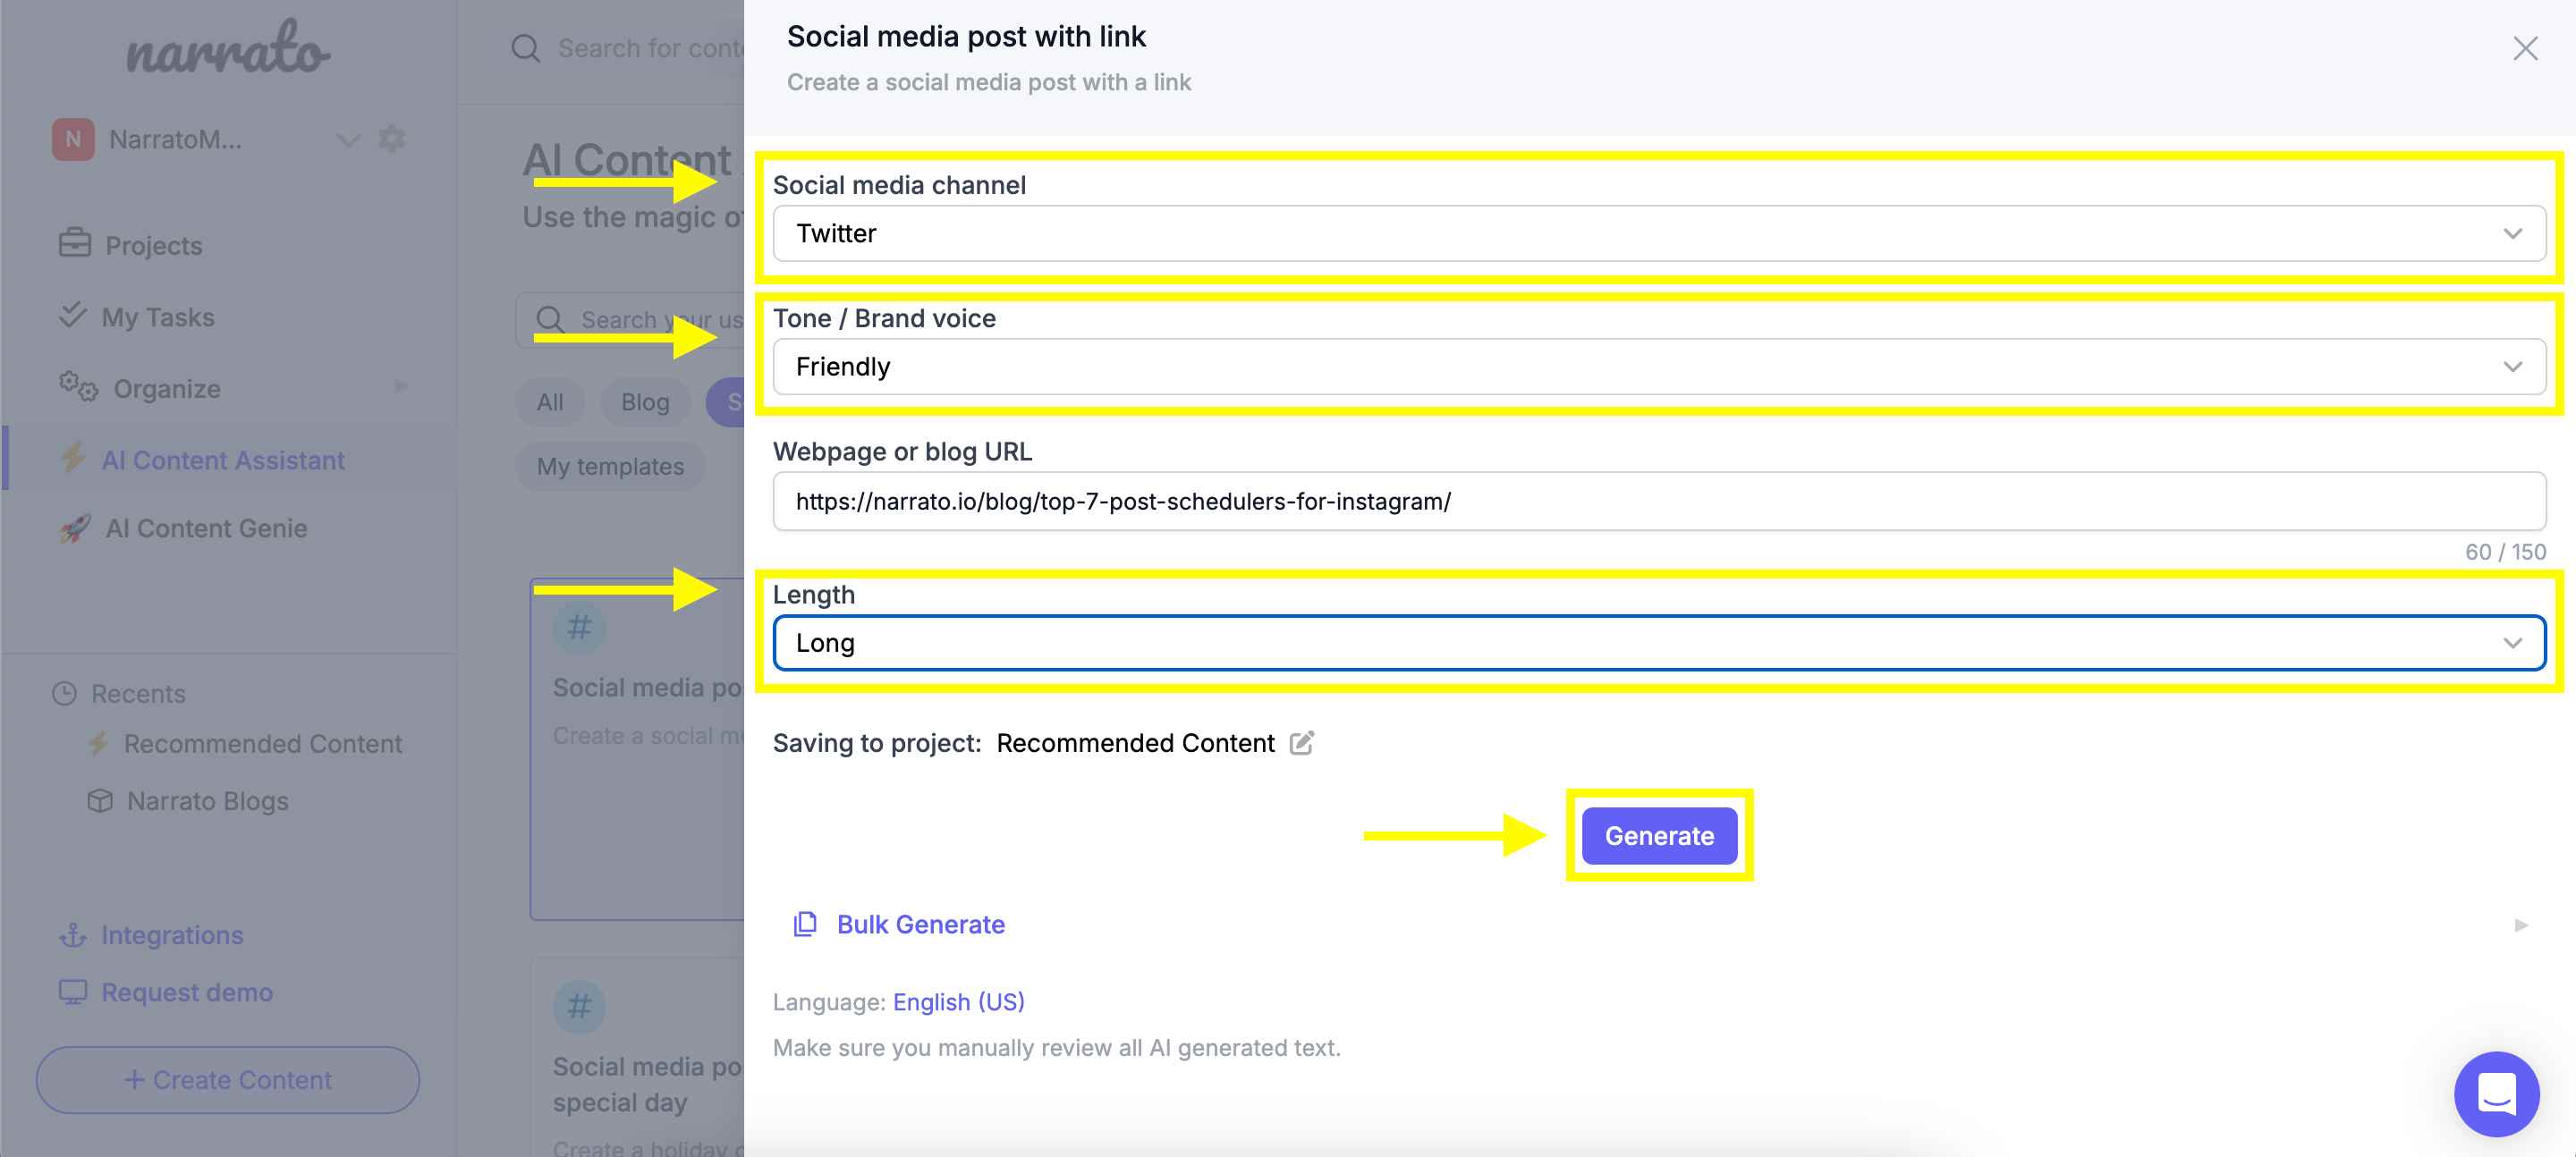 Customizing the social media post with AI